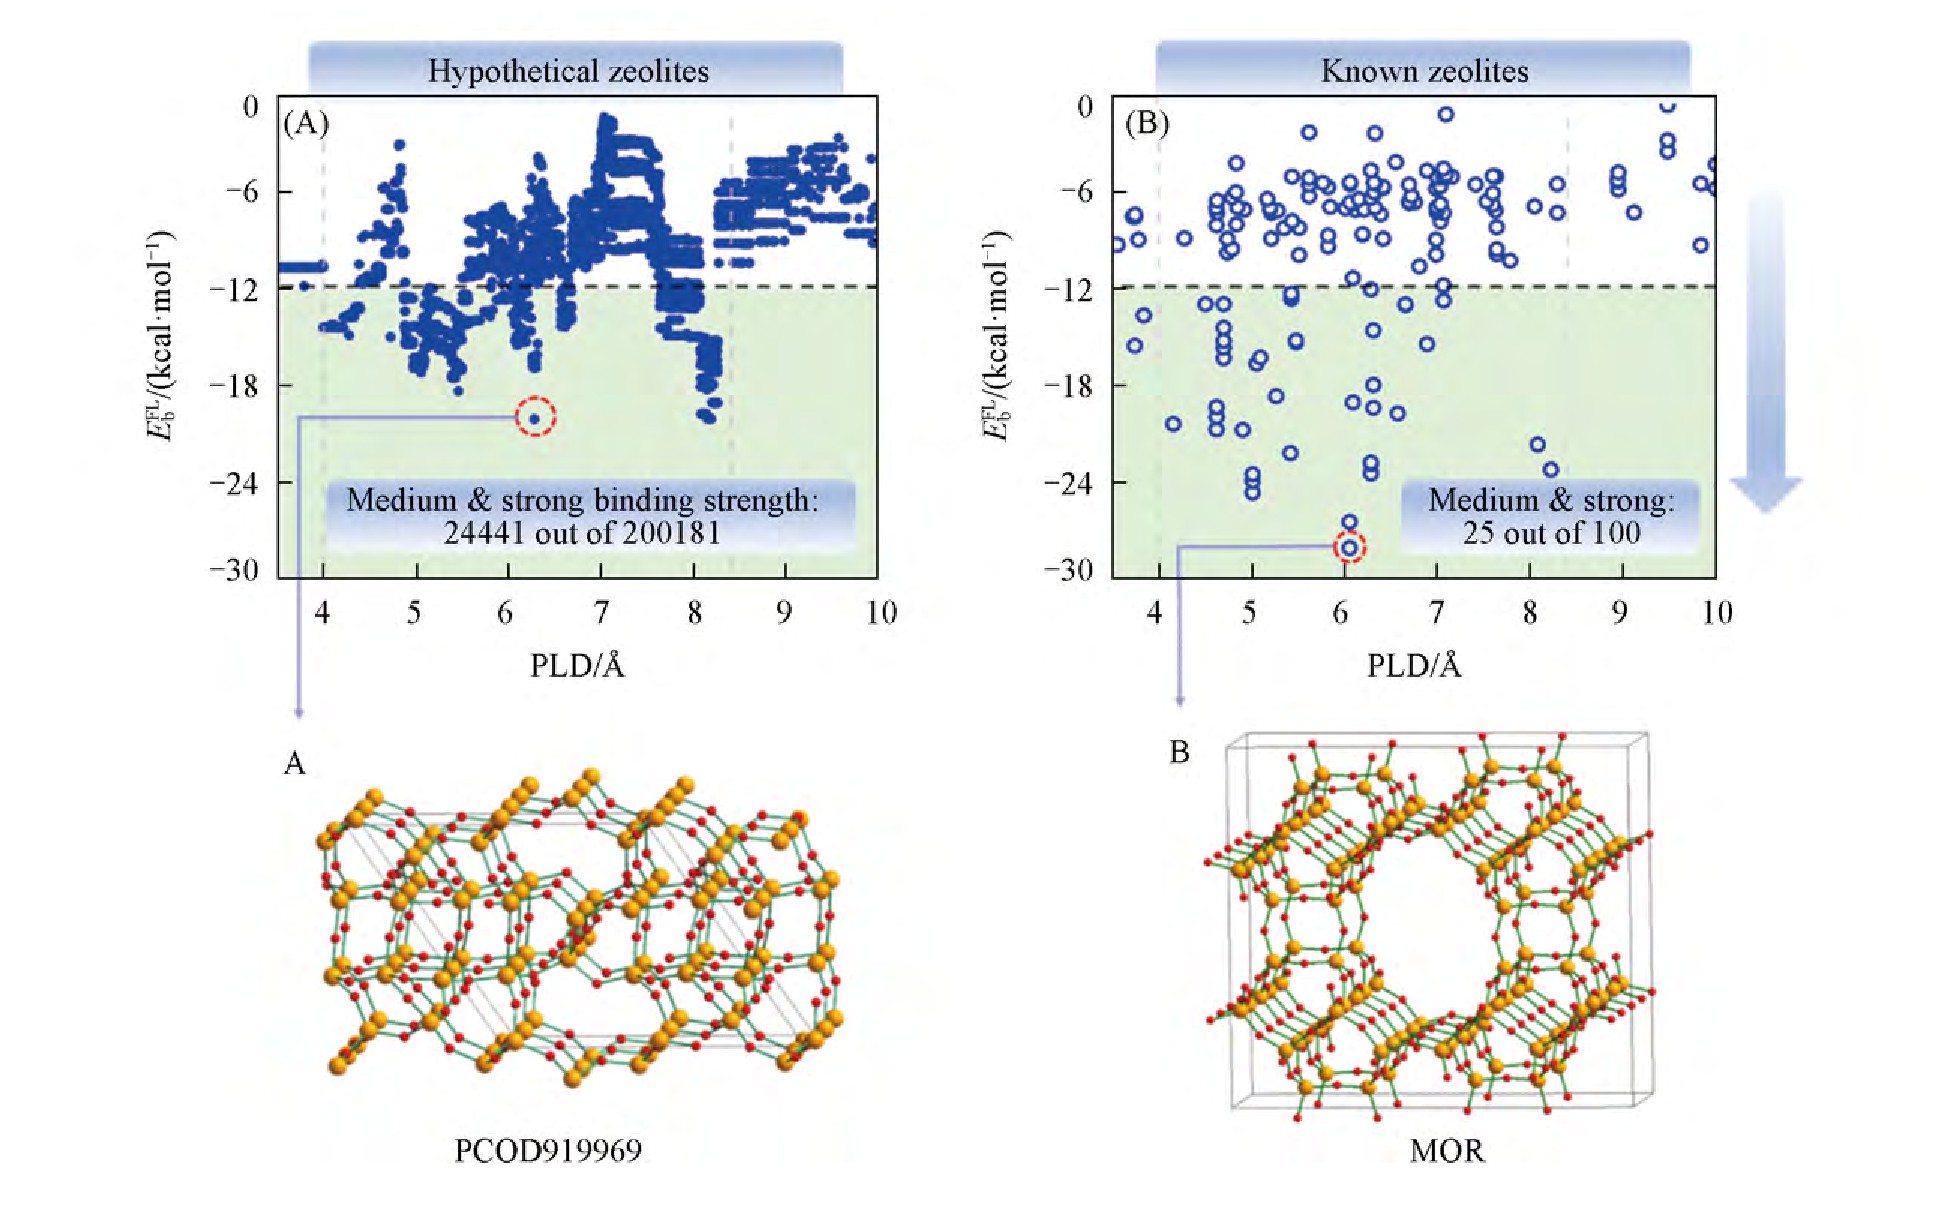 Fig.3 Binding energies(EbPL,1 kcal=4.19 k J) of 200181 hypothetical zeolites(A) and 100 known zeolites(B)against diameters(1?=0.1 nm) of the largest included spheres(PLD)[60]